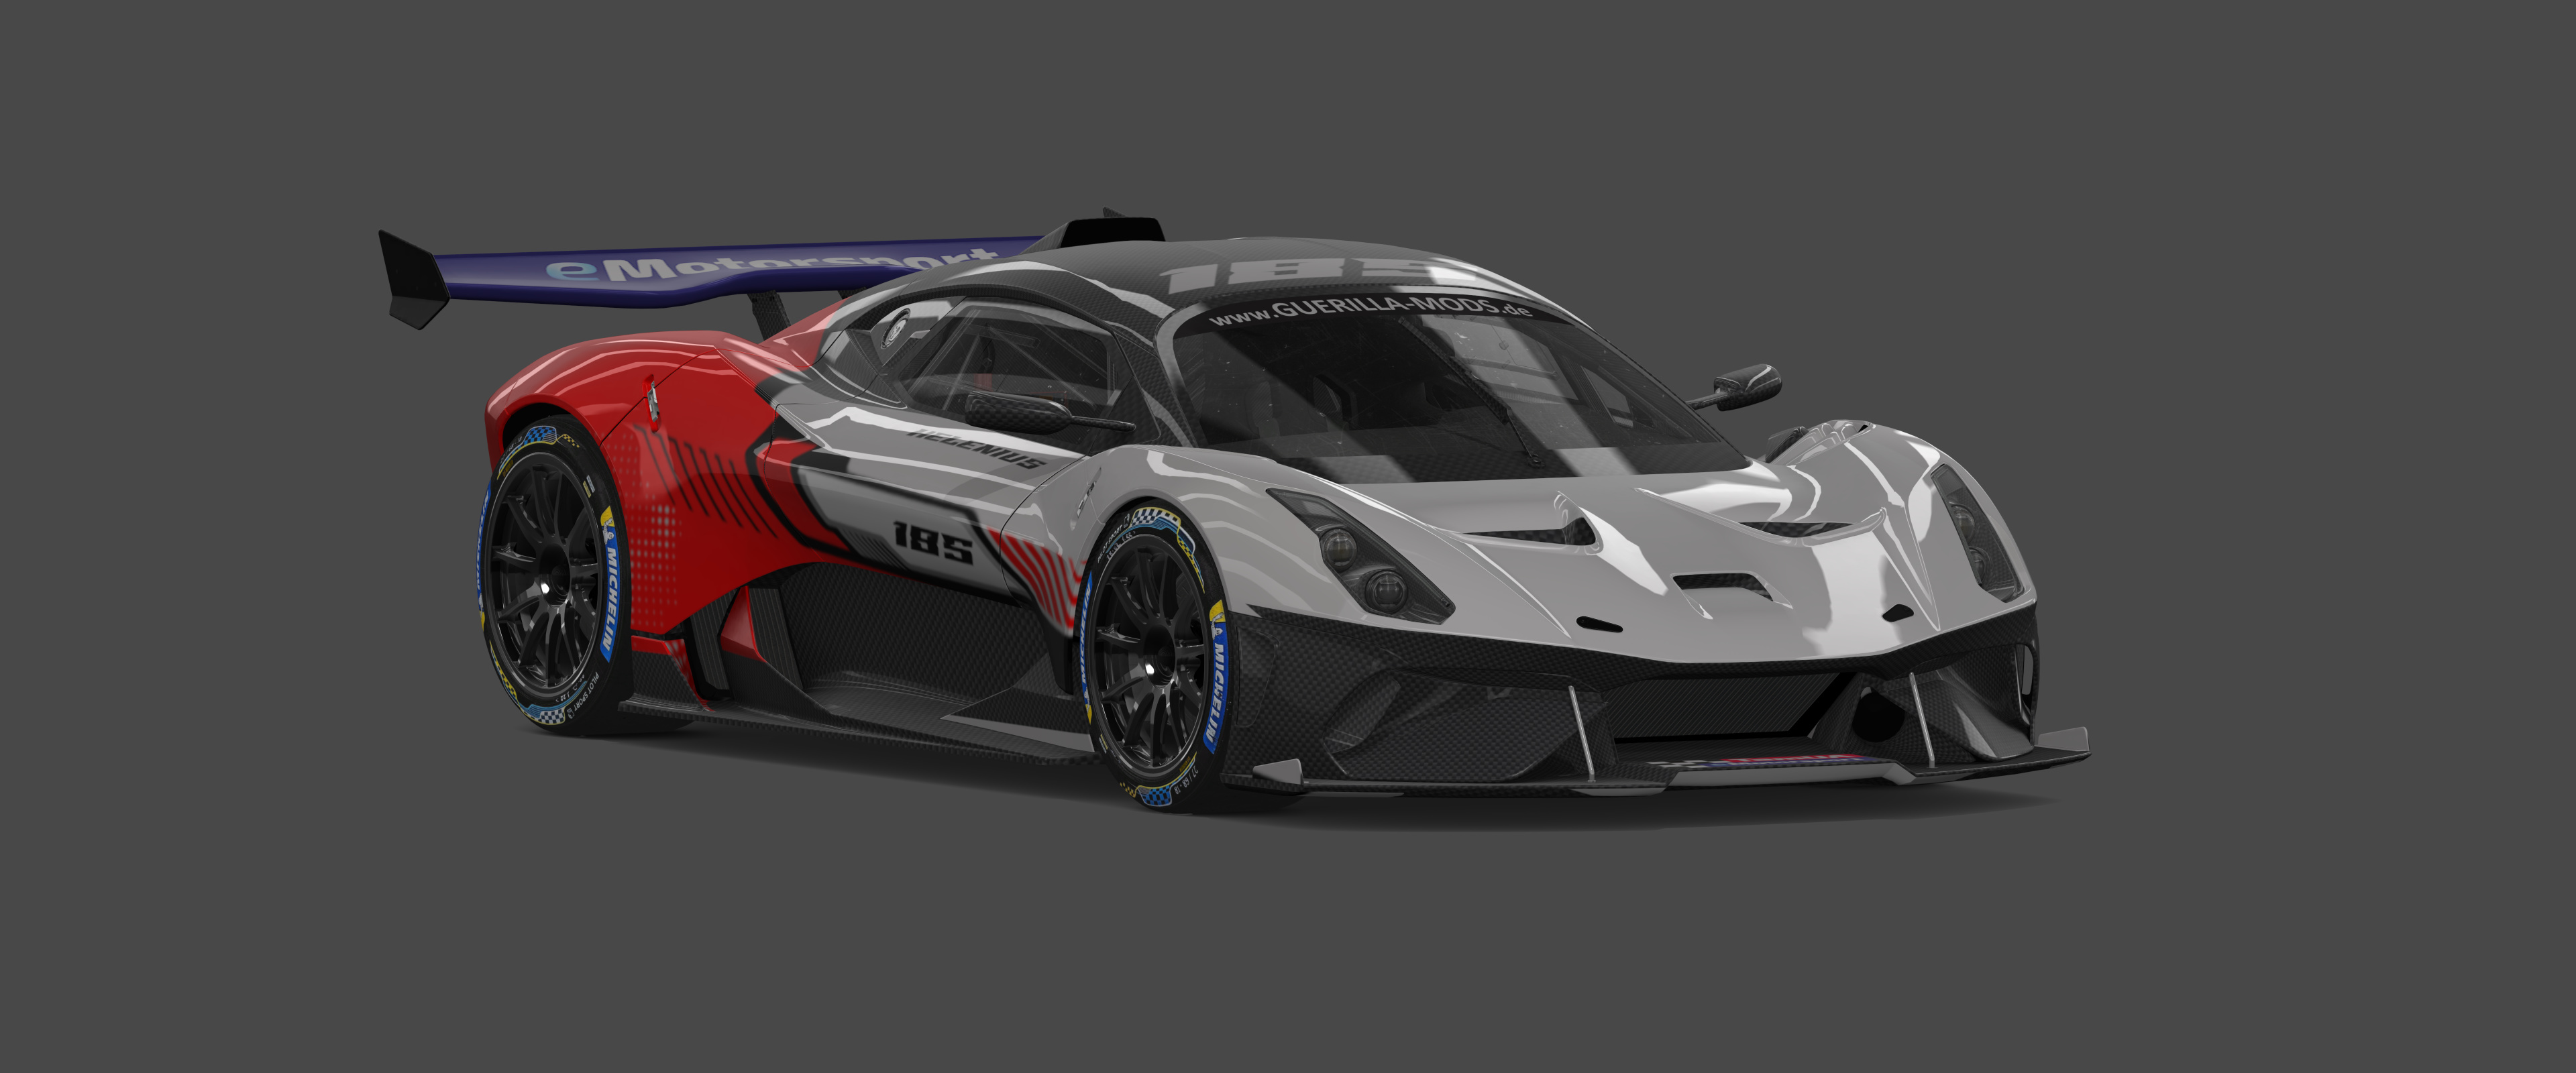 Brabham BT63 GT2 Preview Image